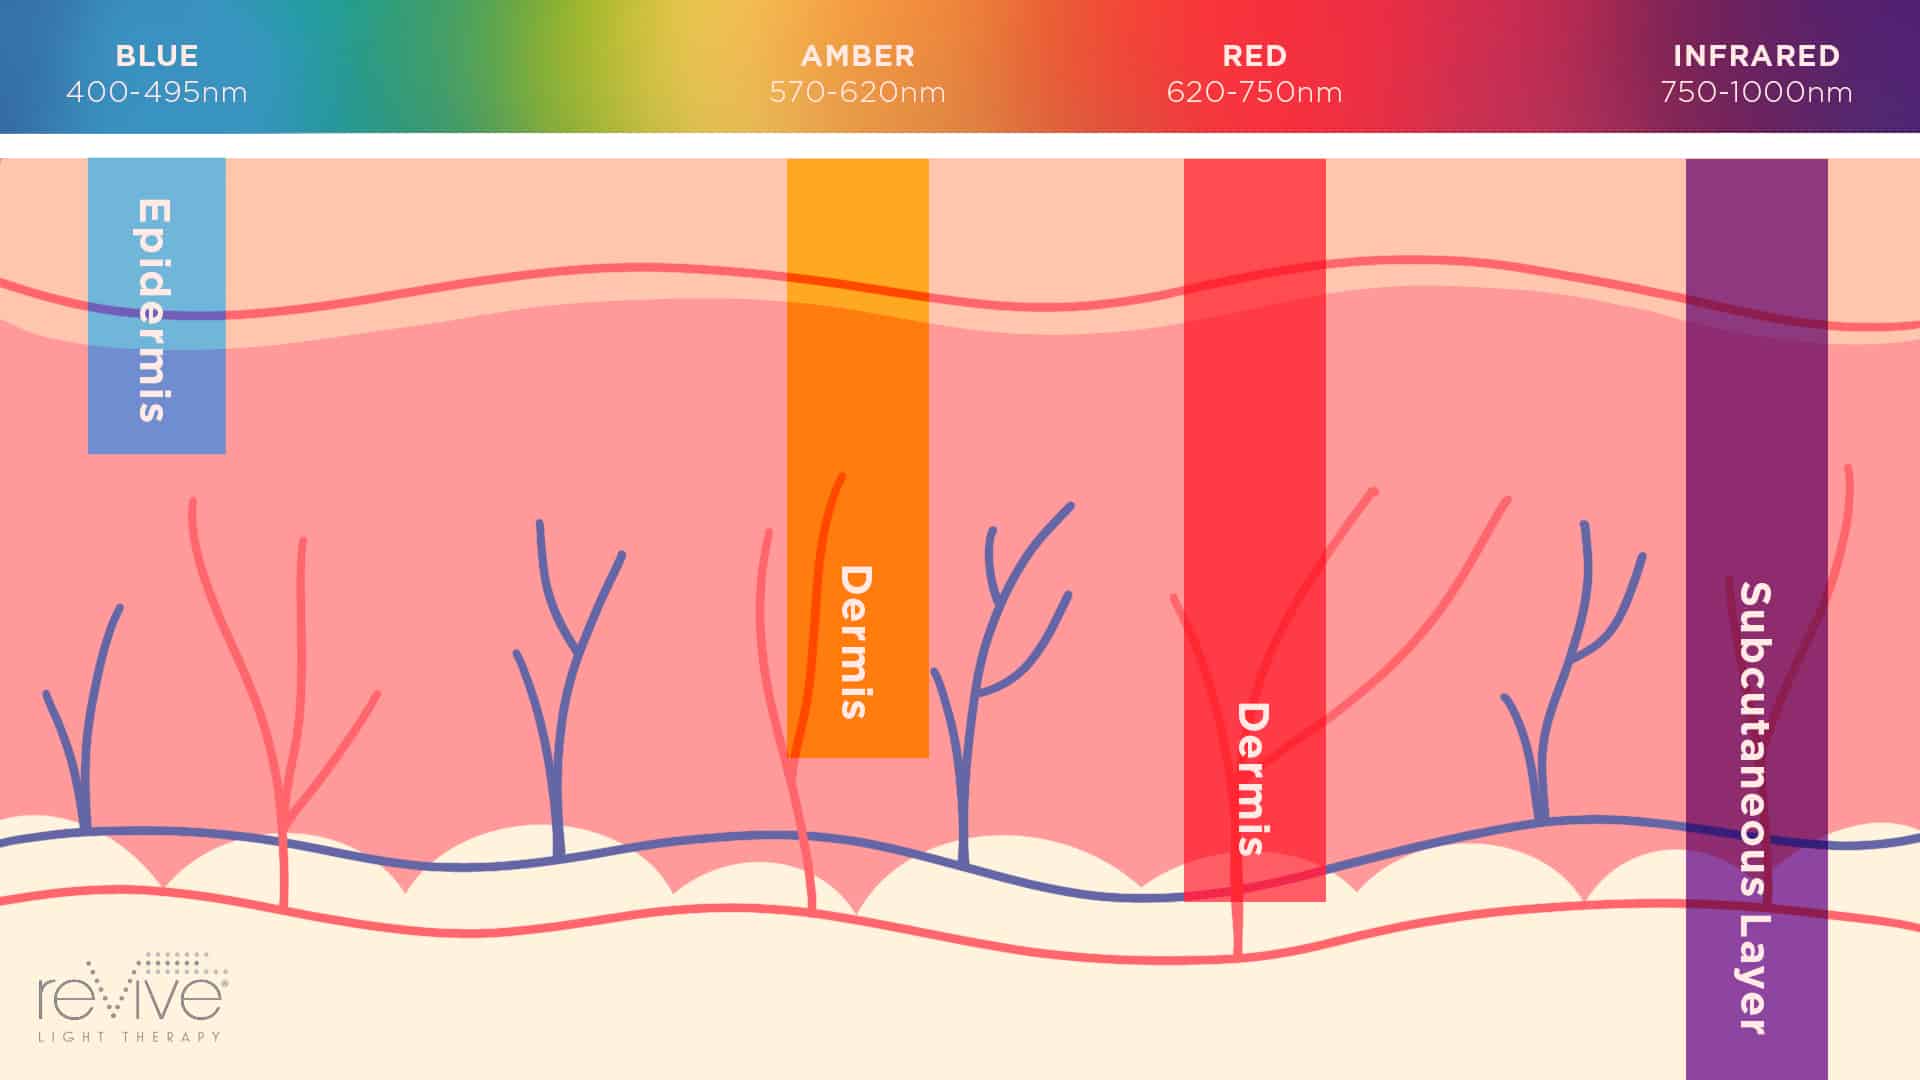 The relationship between visible light, skin penetration and healing. 